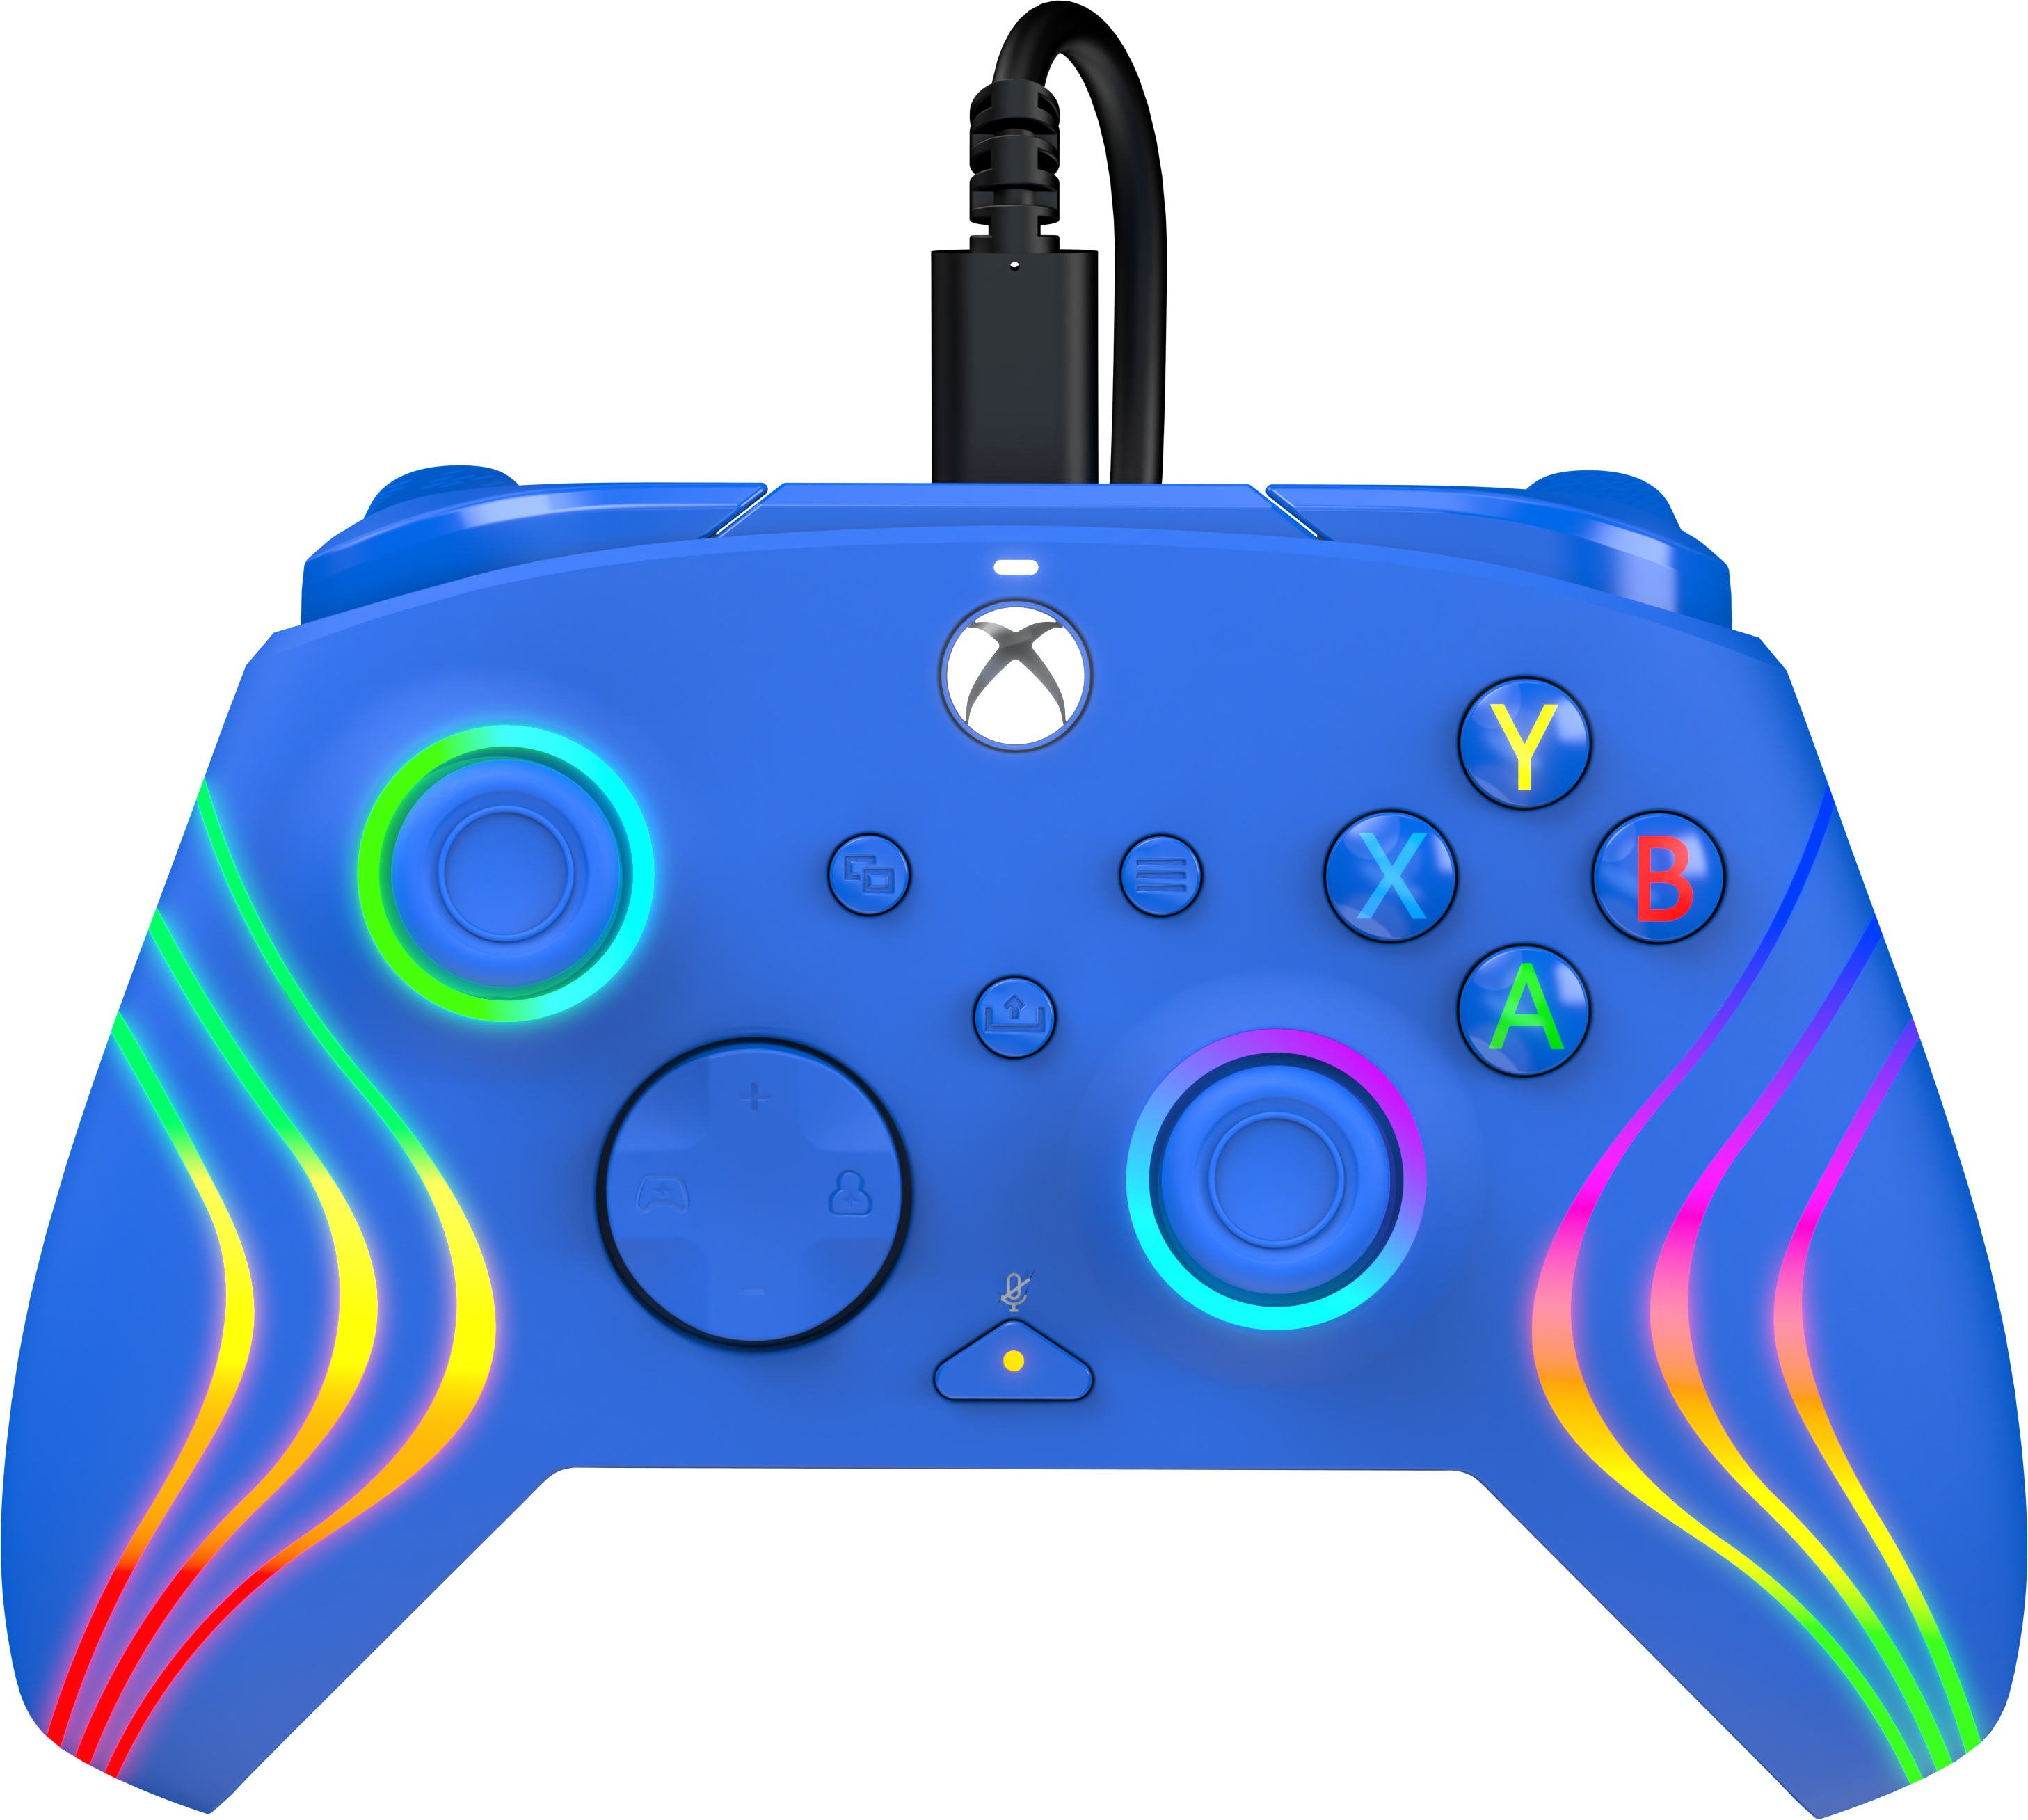 PDP Afterglow WAVE Wired Ctrl 049-024-BL Xbox SeriesX, Blue